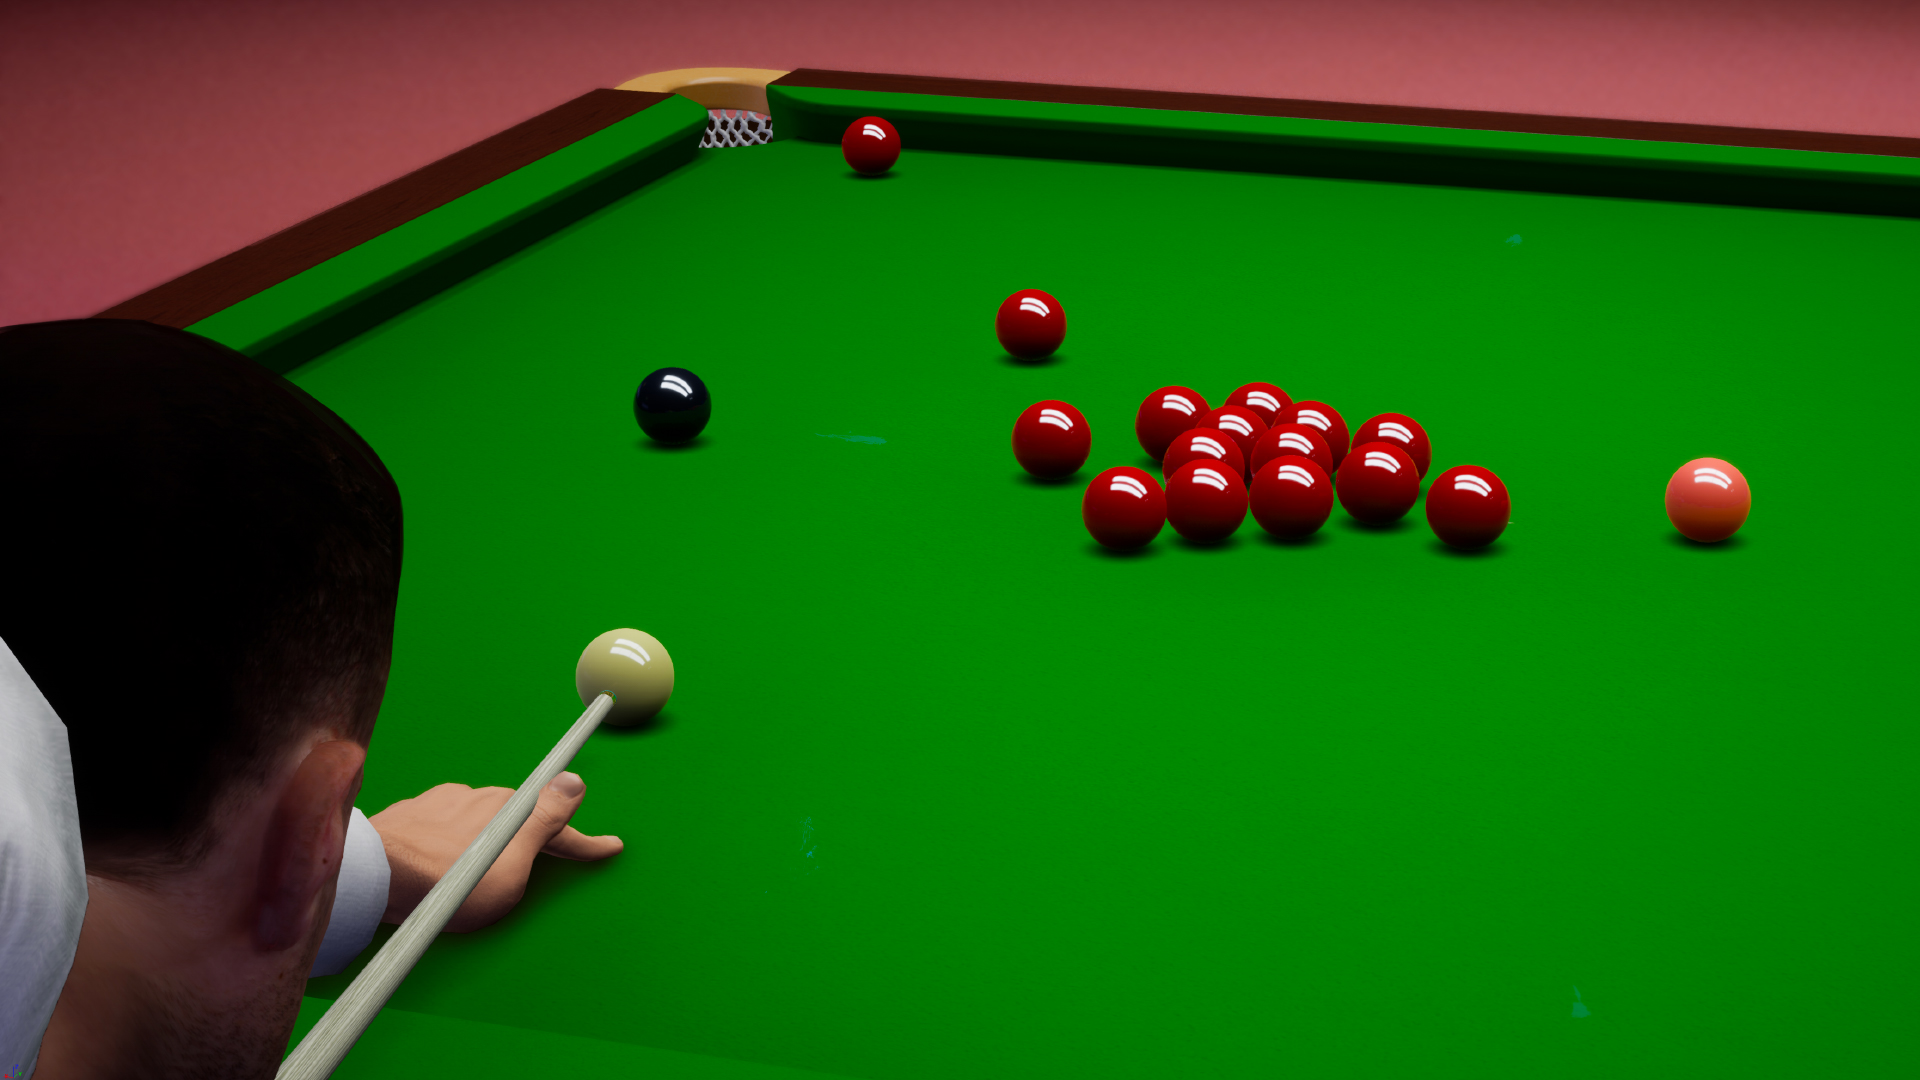 Snooker 19 Review